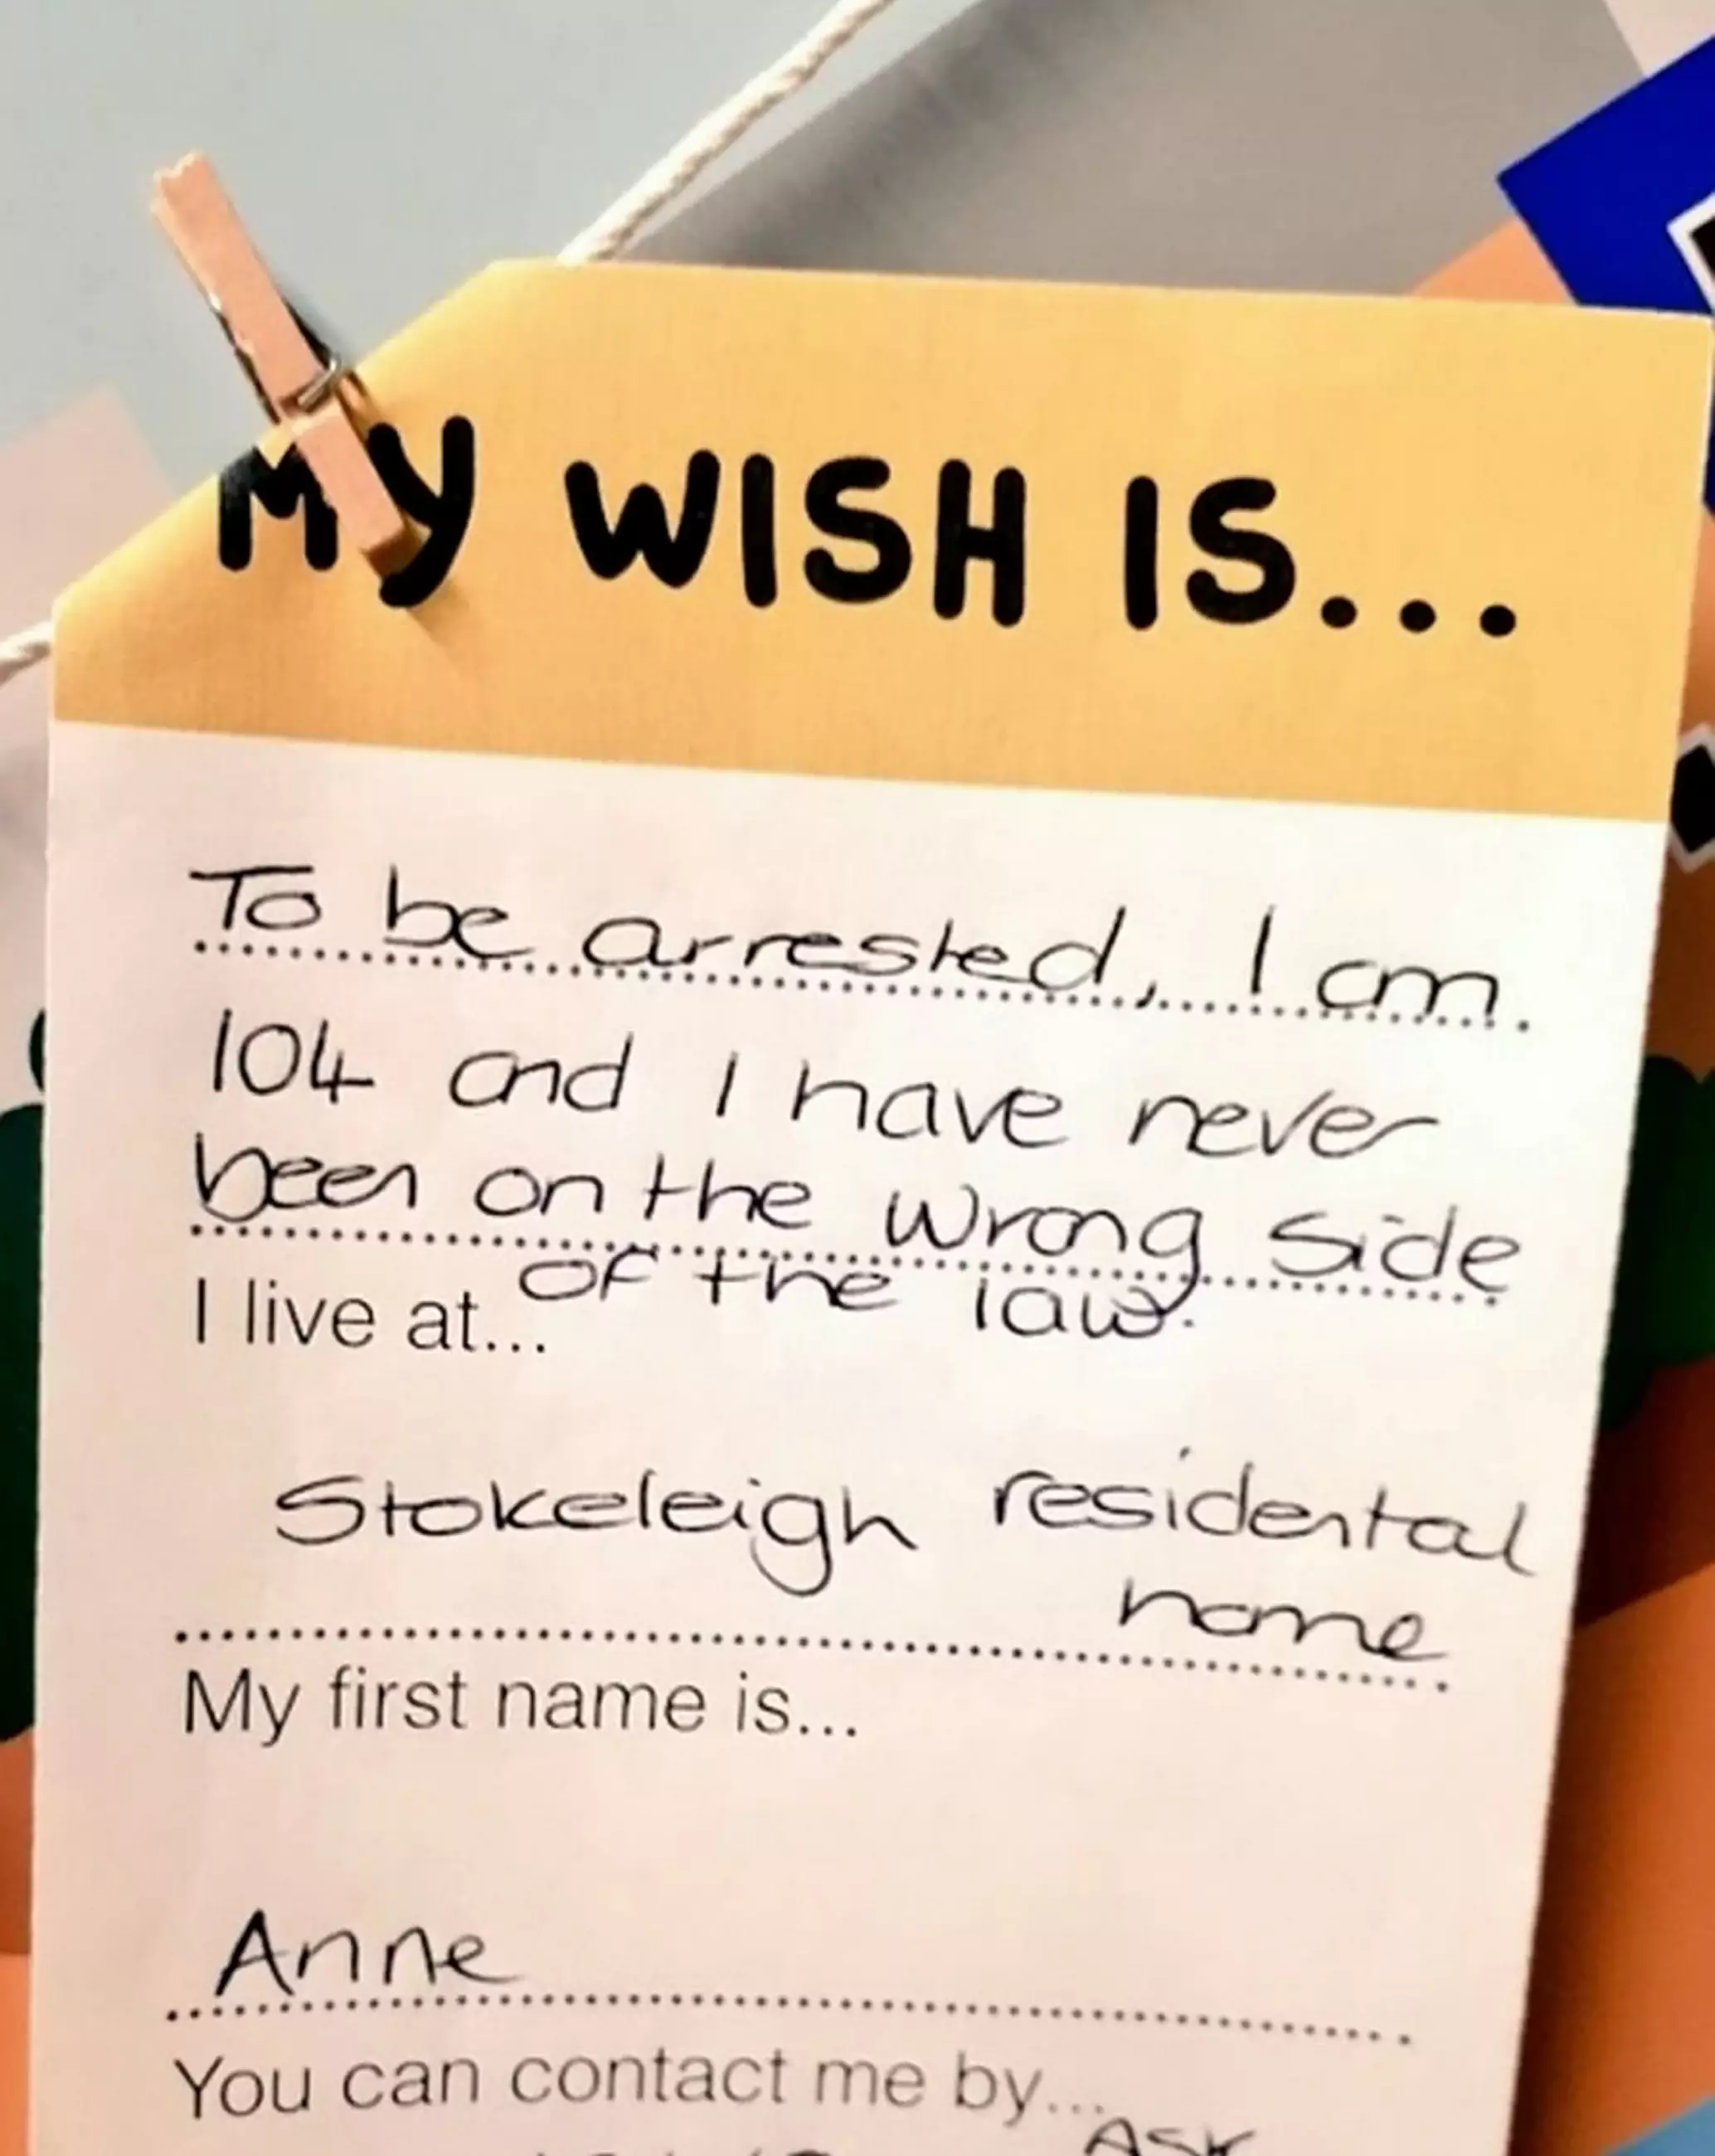 Anne's wish was pegged on to a 'wishing line'.